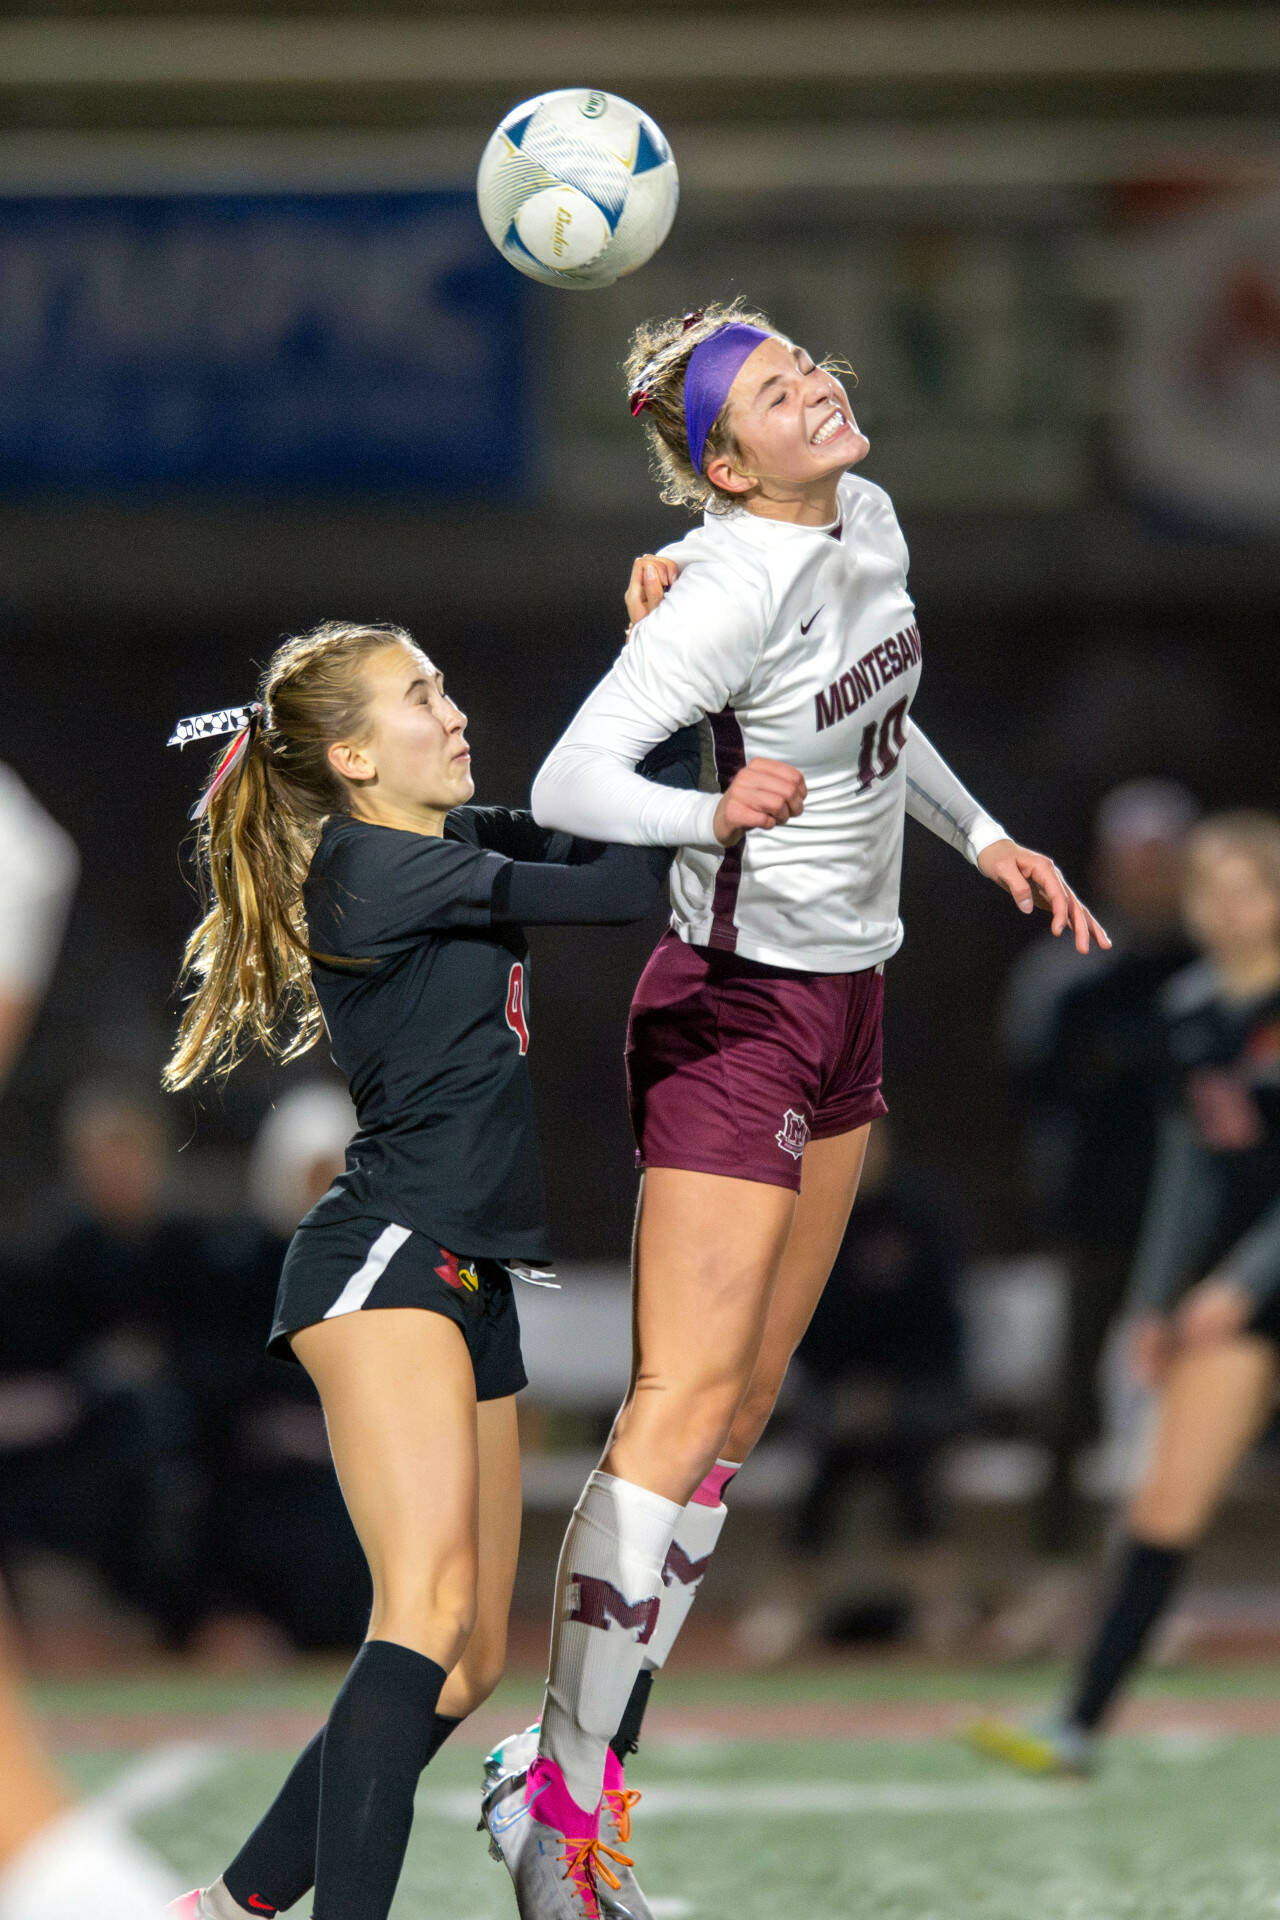 PHOTO BY FOREST WORGUM Montesano senior Mikayla Stanfield (10) heads the ball against Seattle Academy’s Addison Bay during the Bulldogs’ 1-0 loss in the 1A State semifinals on Friday at Mount Tahoma Stadium in Tacoma.